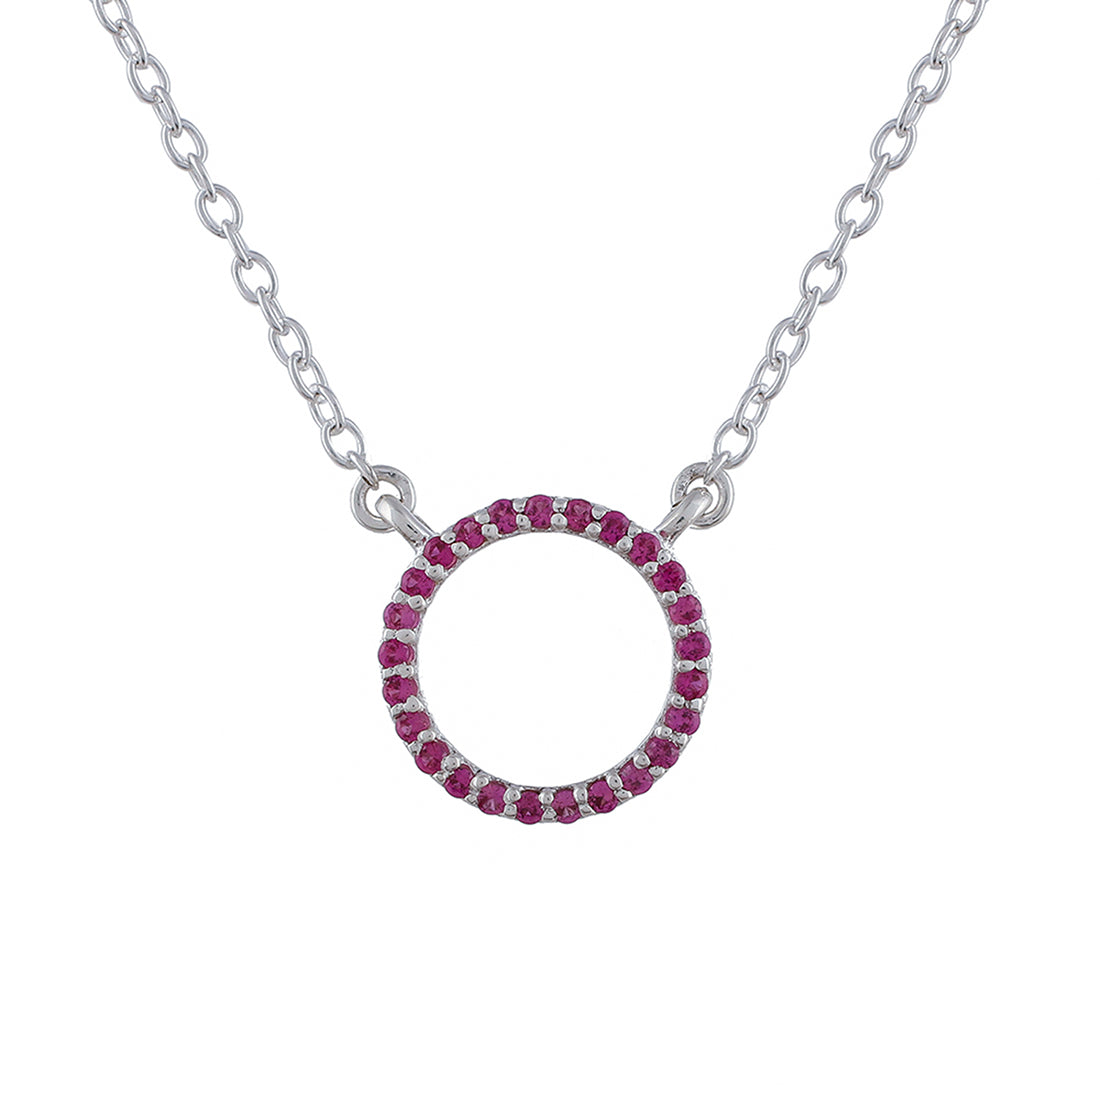 Attractive 925 Sterling Silver Modern Necklace